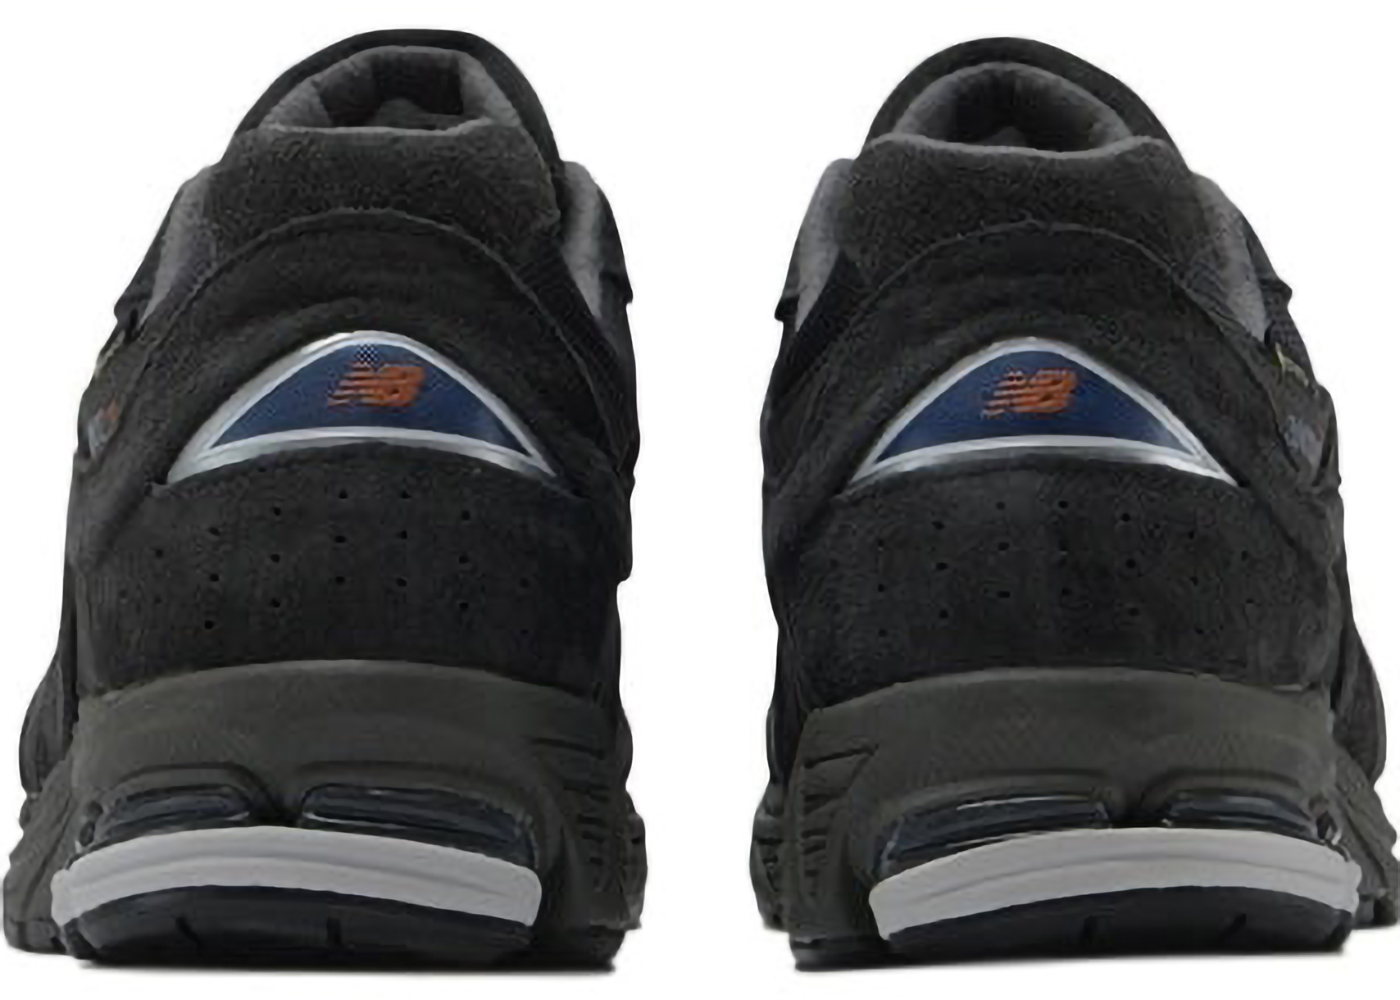 New Balance 2002R Gore-Tex Charcoal Beams Exclusive